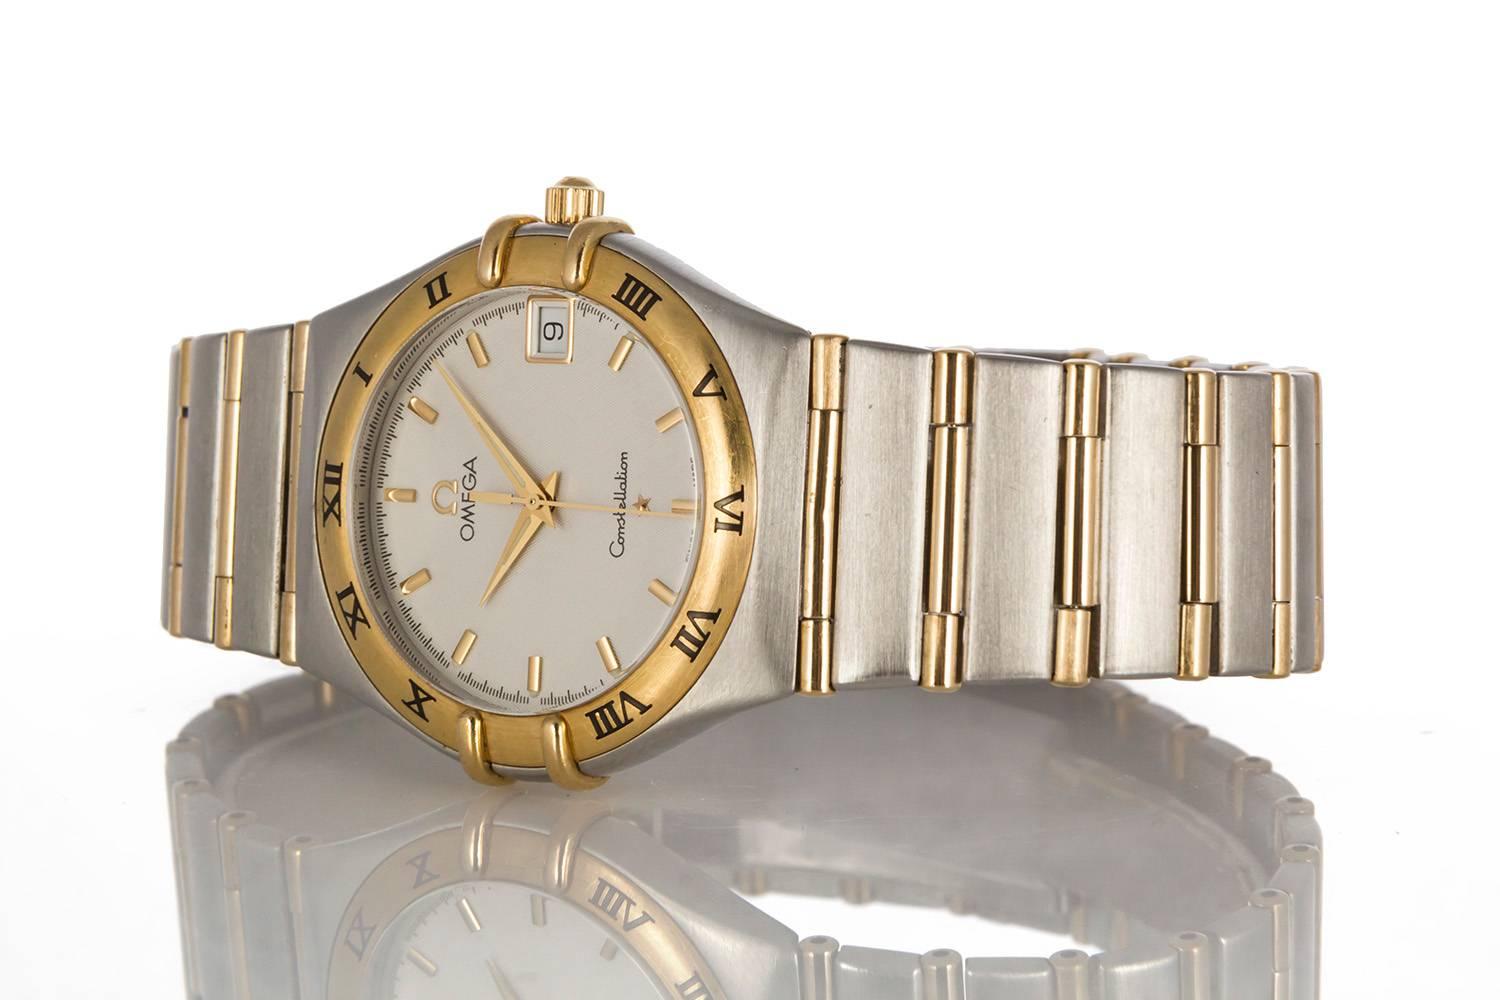 We are pleased to offer this Omega Constellation Two Tone 18k Yellow Gold & Stainless Steel Mens Watch. It features a quartz movement set in a 34mm stainless steel & gold case. It will fit up to a 7.5